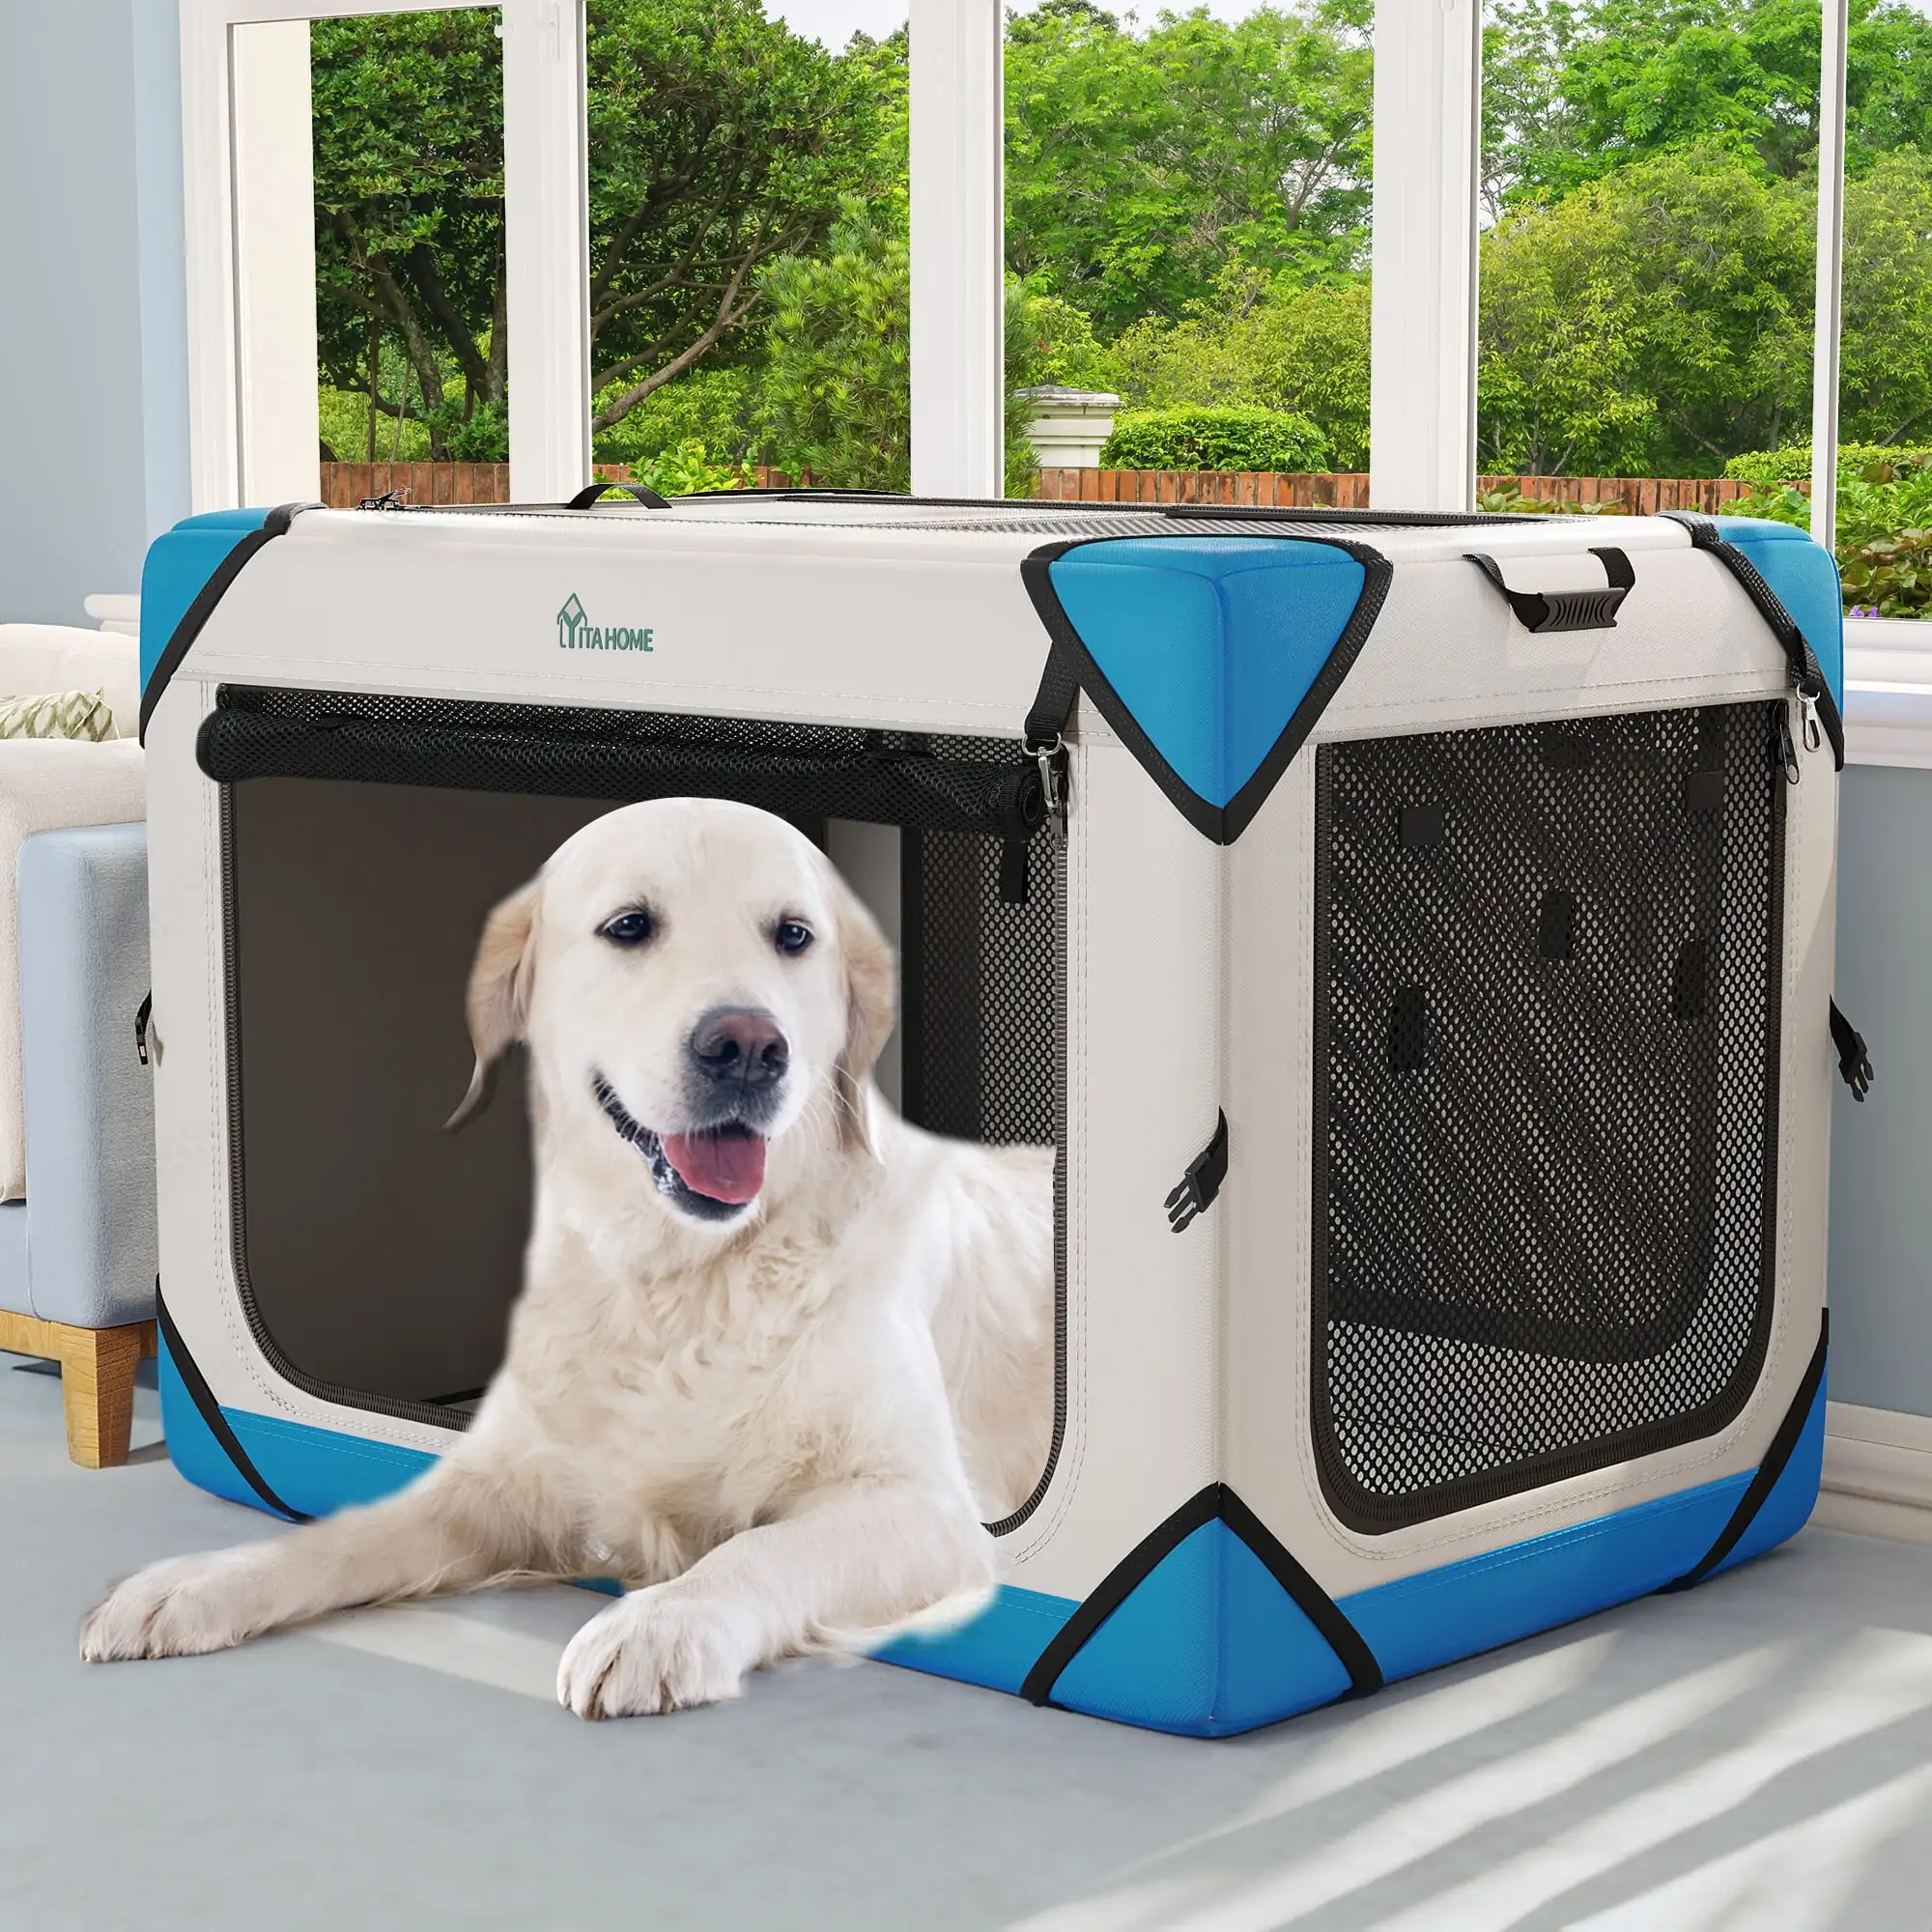 

Dextrus Portable Dog Travel Crate, Collapsible Dog Crate with 4 Doors and Sturdy Mesh Windows, Soft Dog Kennel